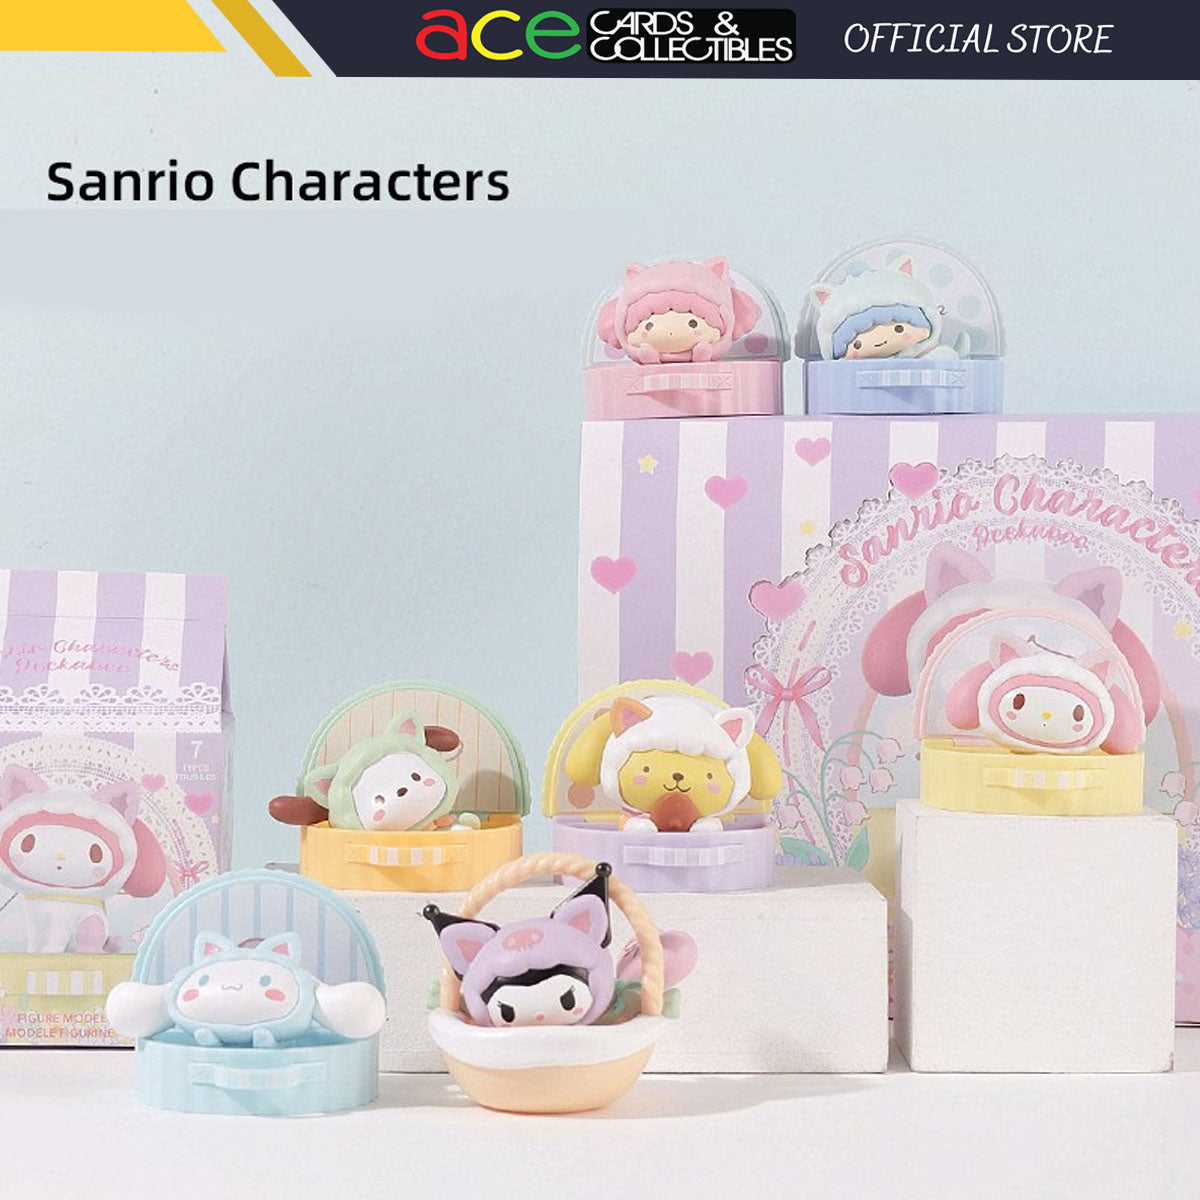 Miniso x Sanrio Characters Peekaboo Series-Whole Display Box (6pcs)-Miniso-Ace Cards & Collectibles